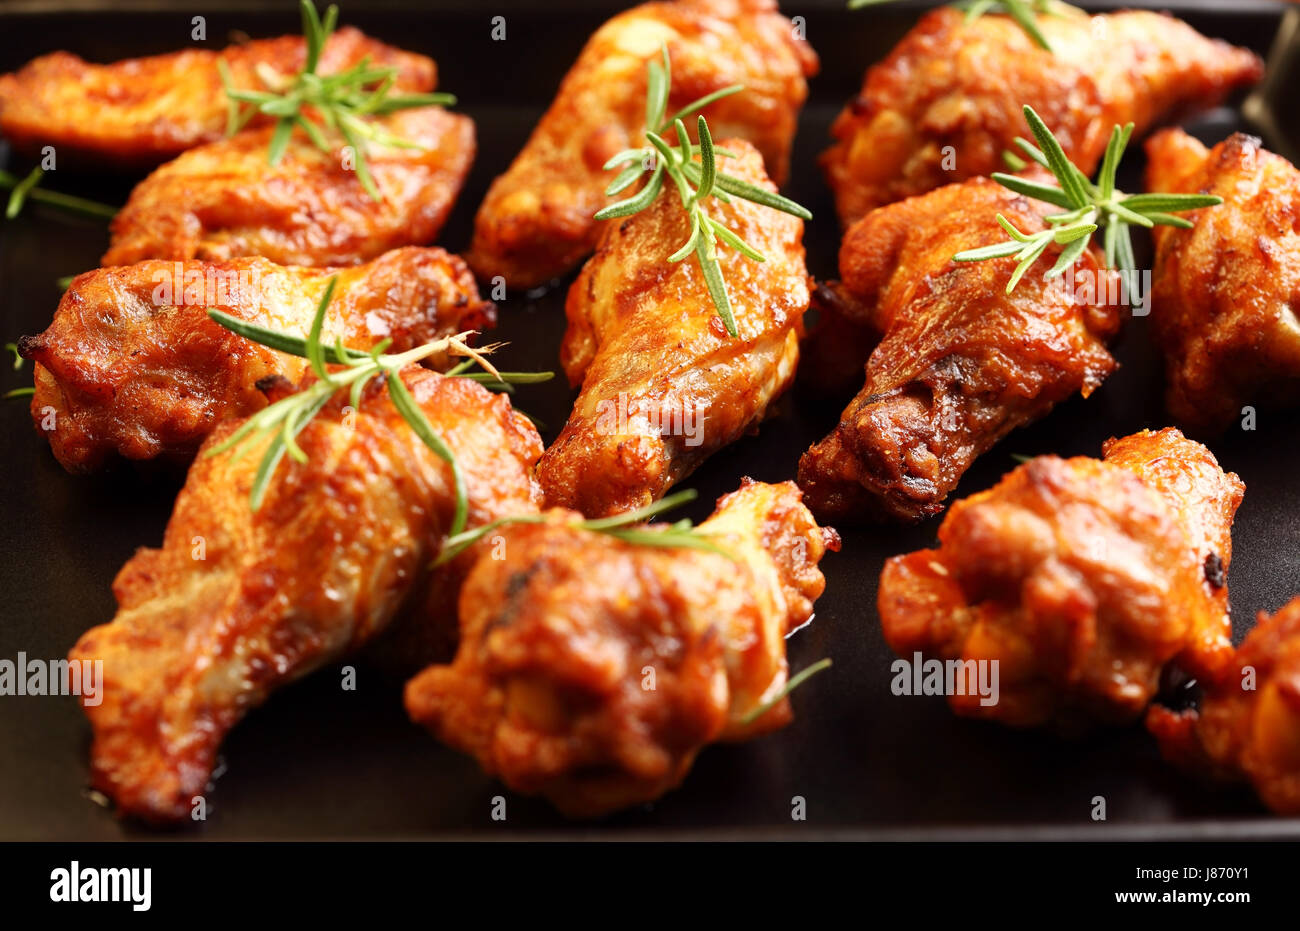 food, aliment, hot, poultry, chicken, tray, baking, wings, meat, smoke, Stock Photo